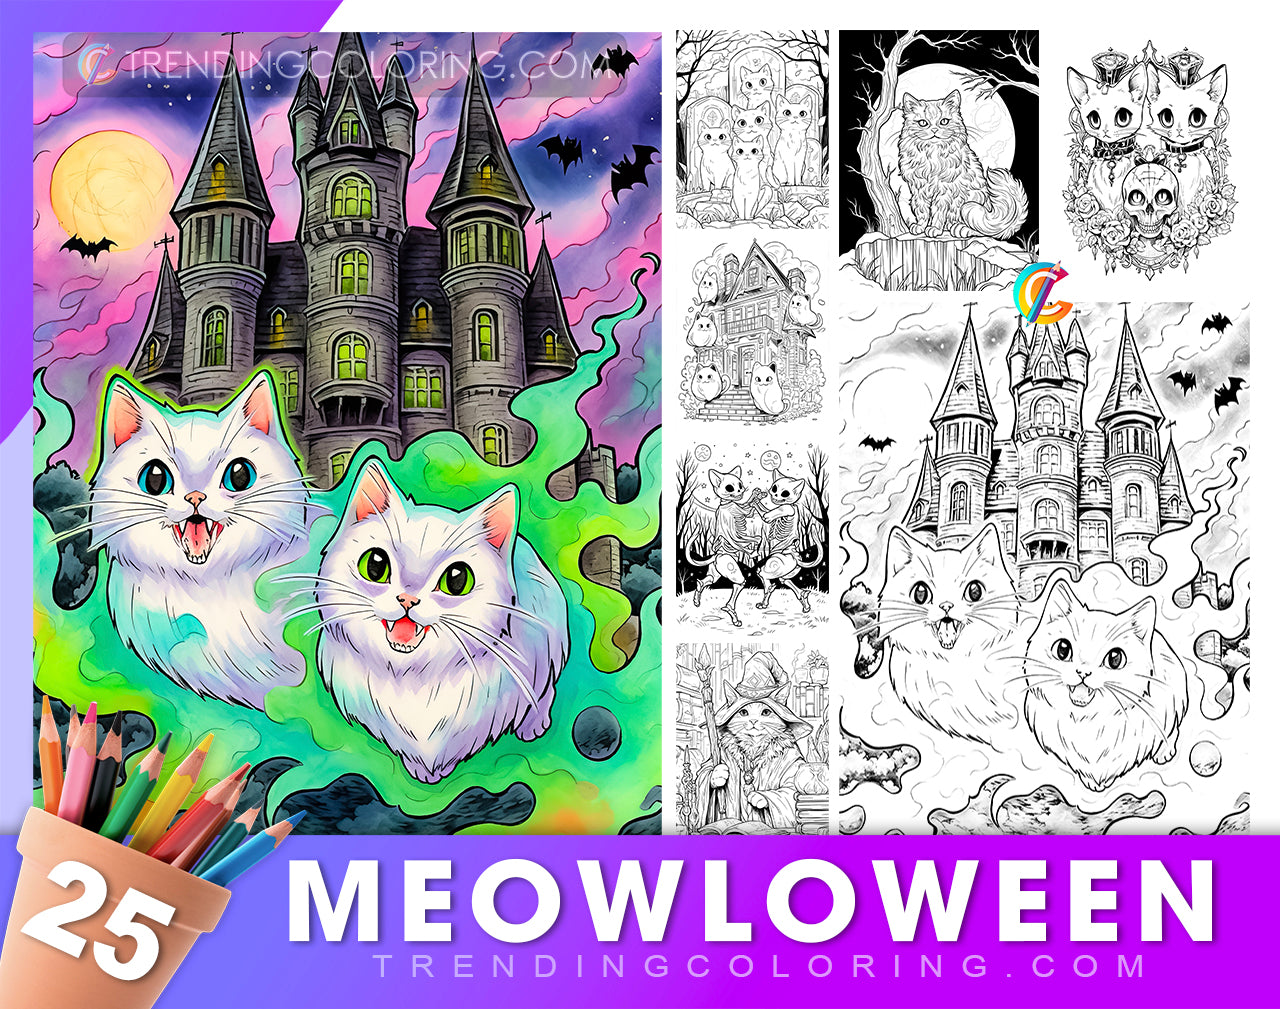 25 Meowloween Coloring Pages - Halloween Coloring - Instant Download - Printable PDF